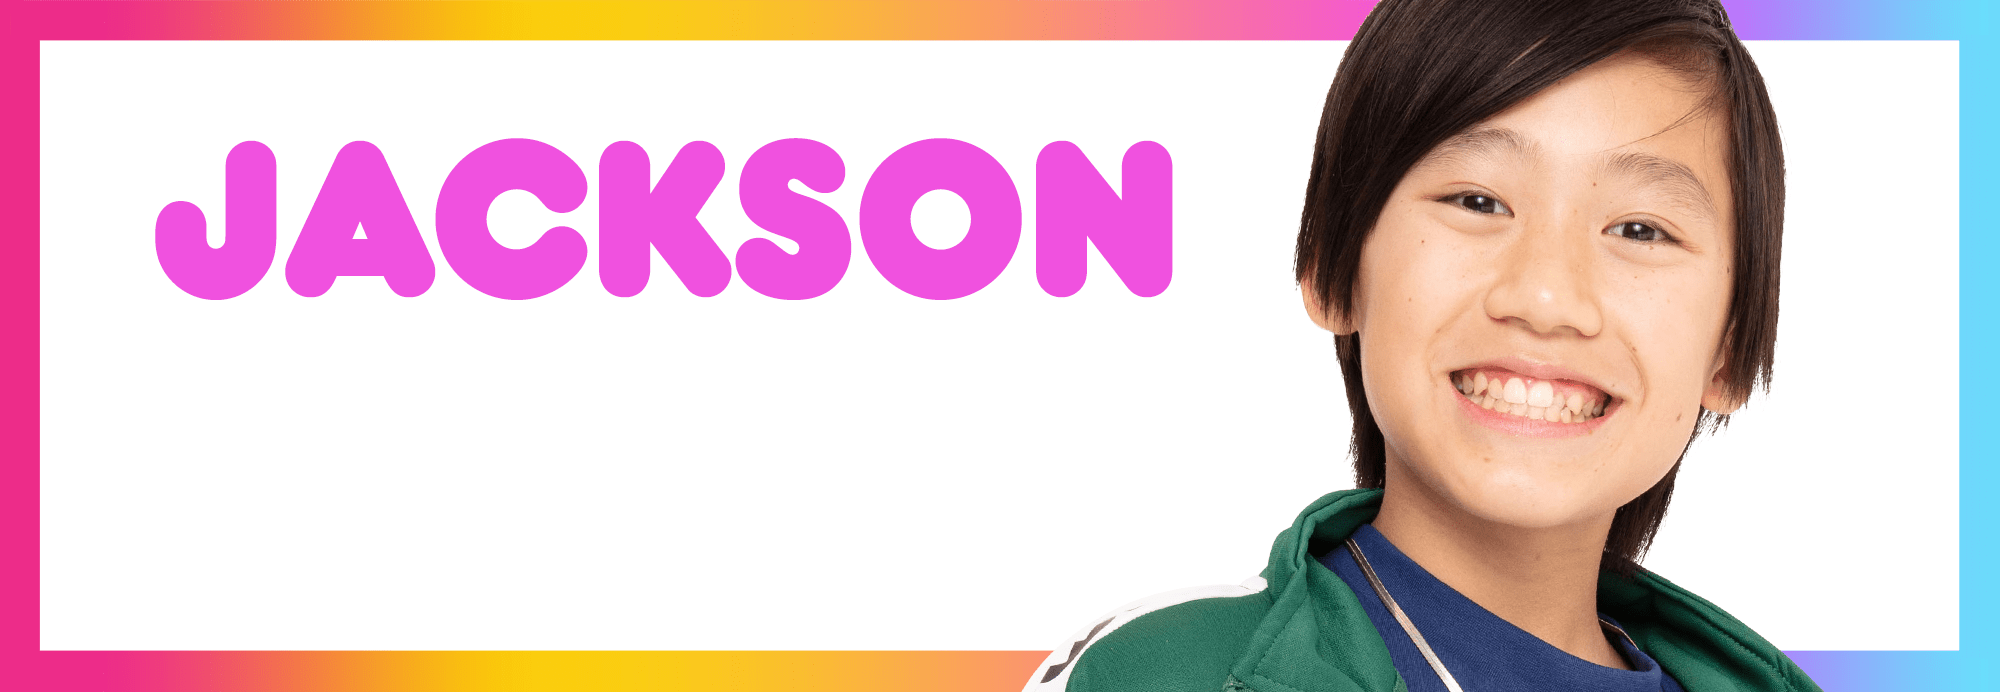 Featured image for “Jackson”